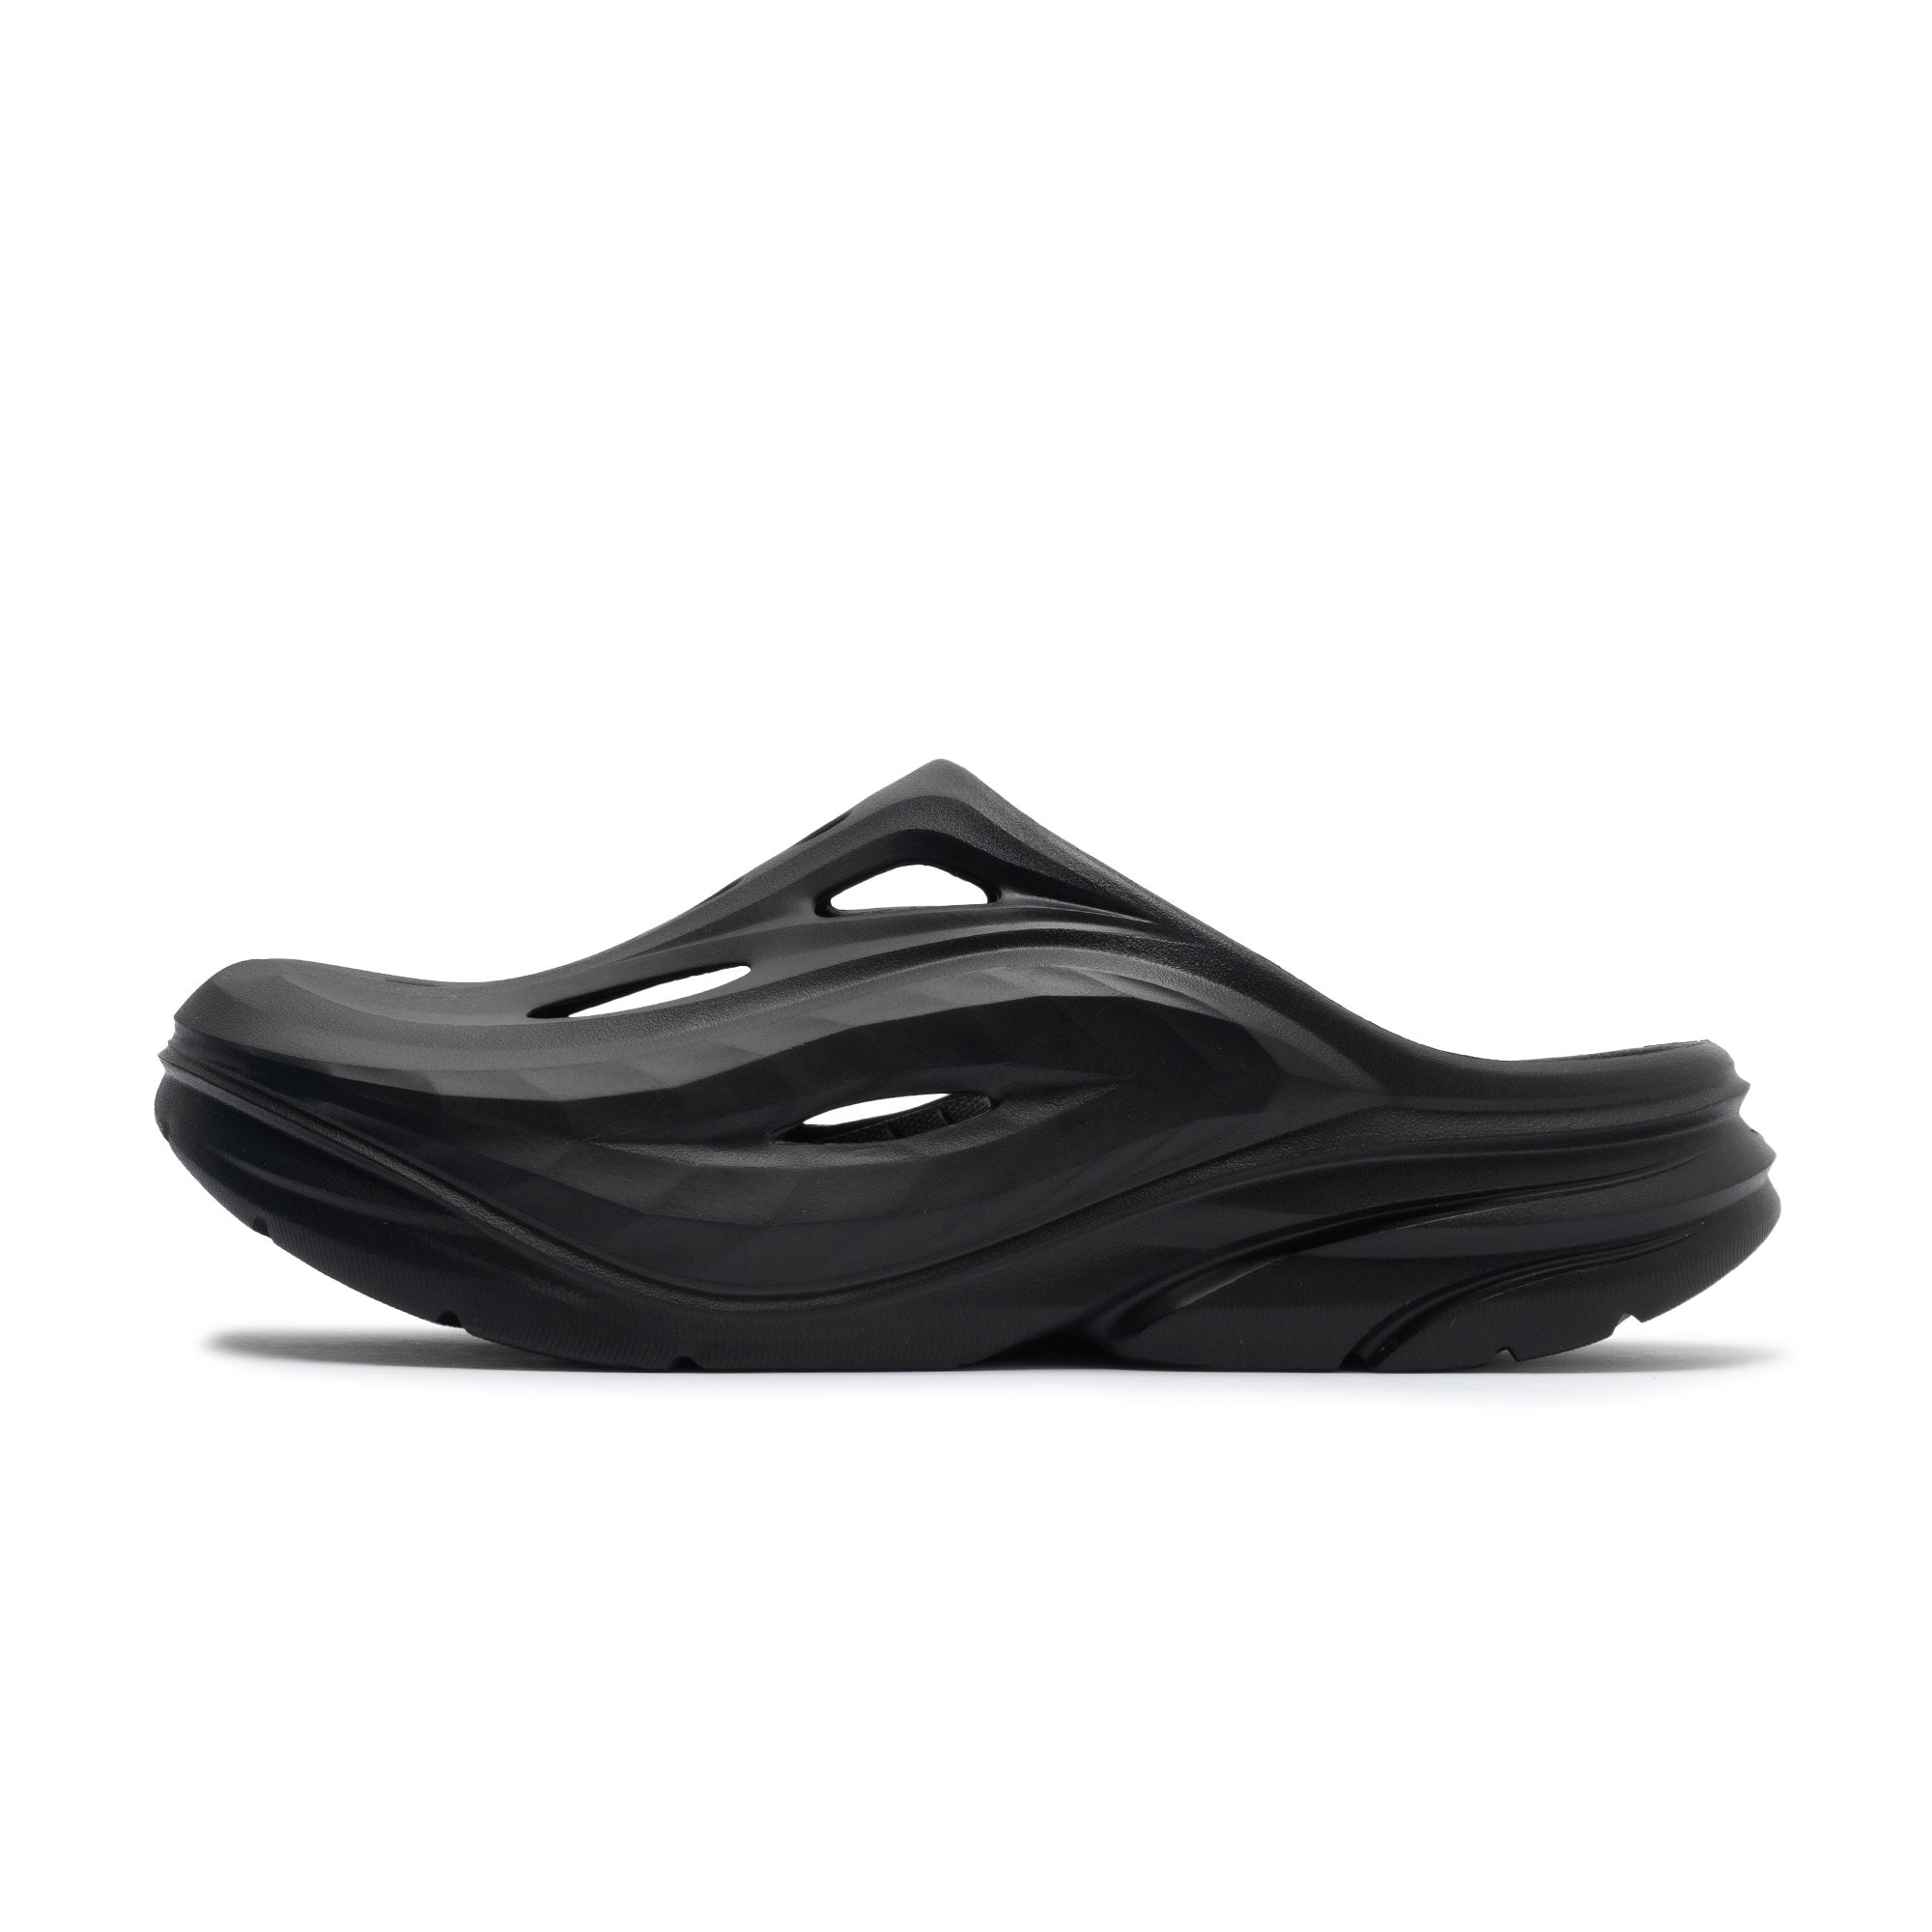 15 dollar nike shoes mens clearance sandals wide